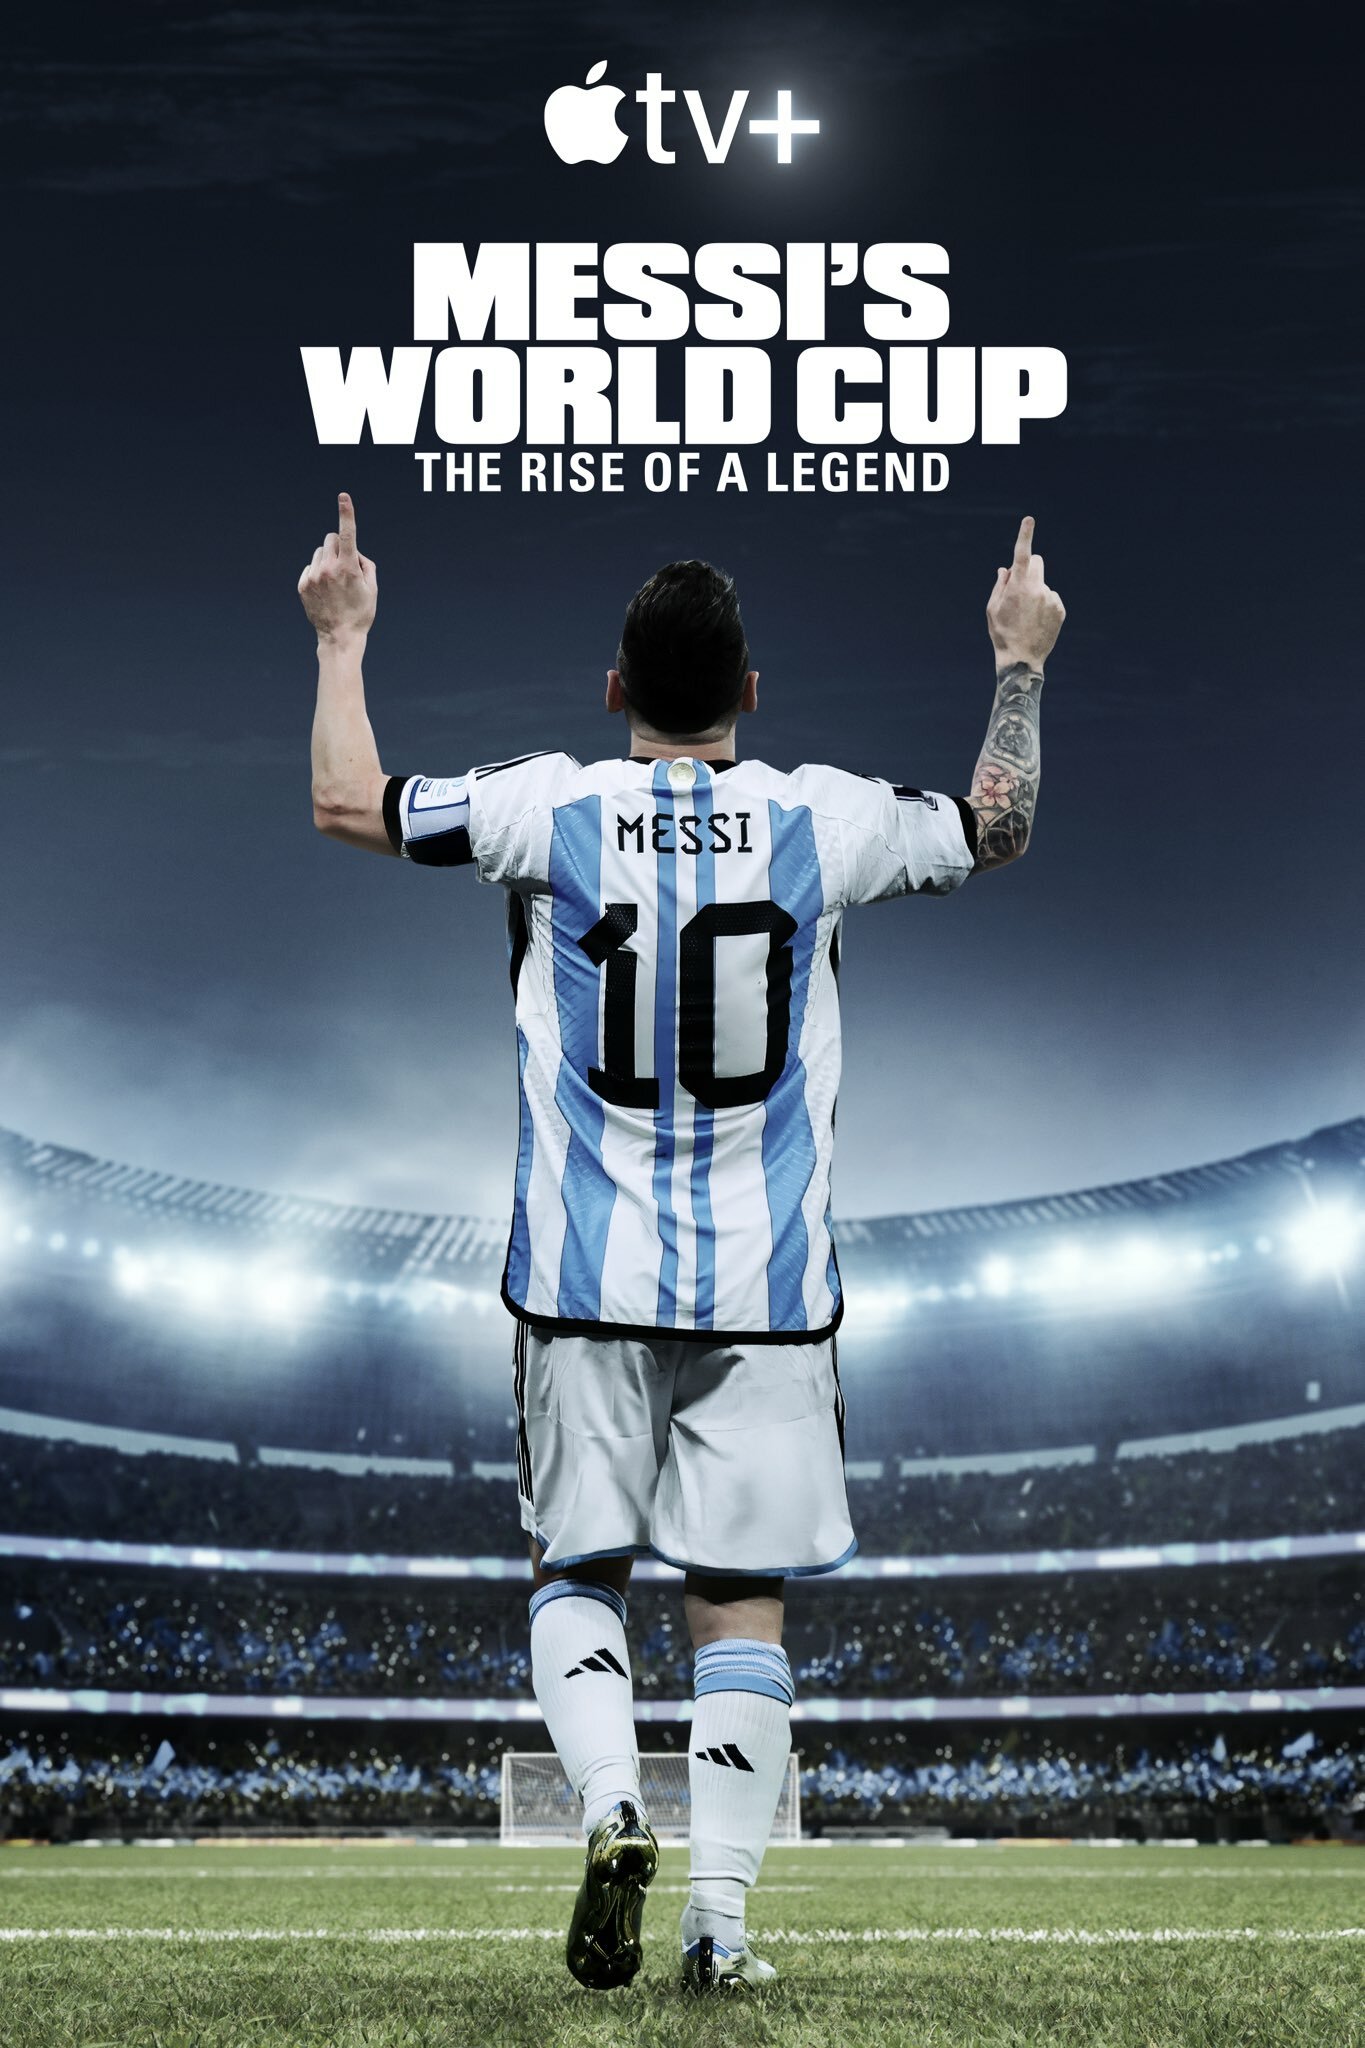 Messi's World Cup: The Rise of a Legend ne zaman